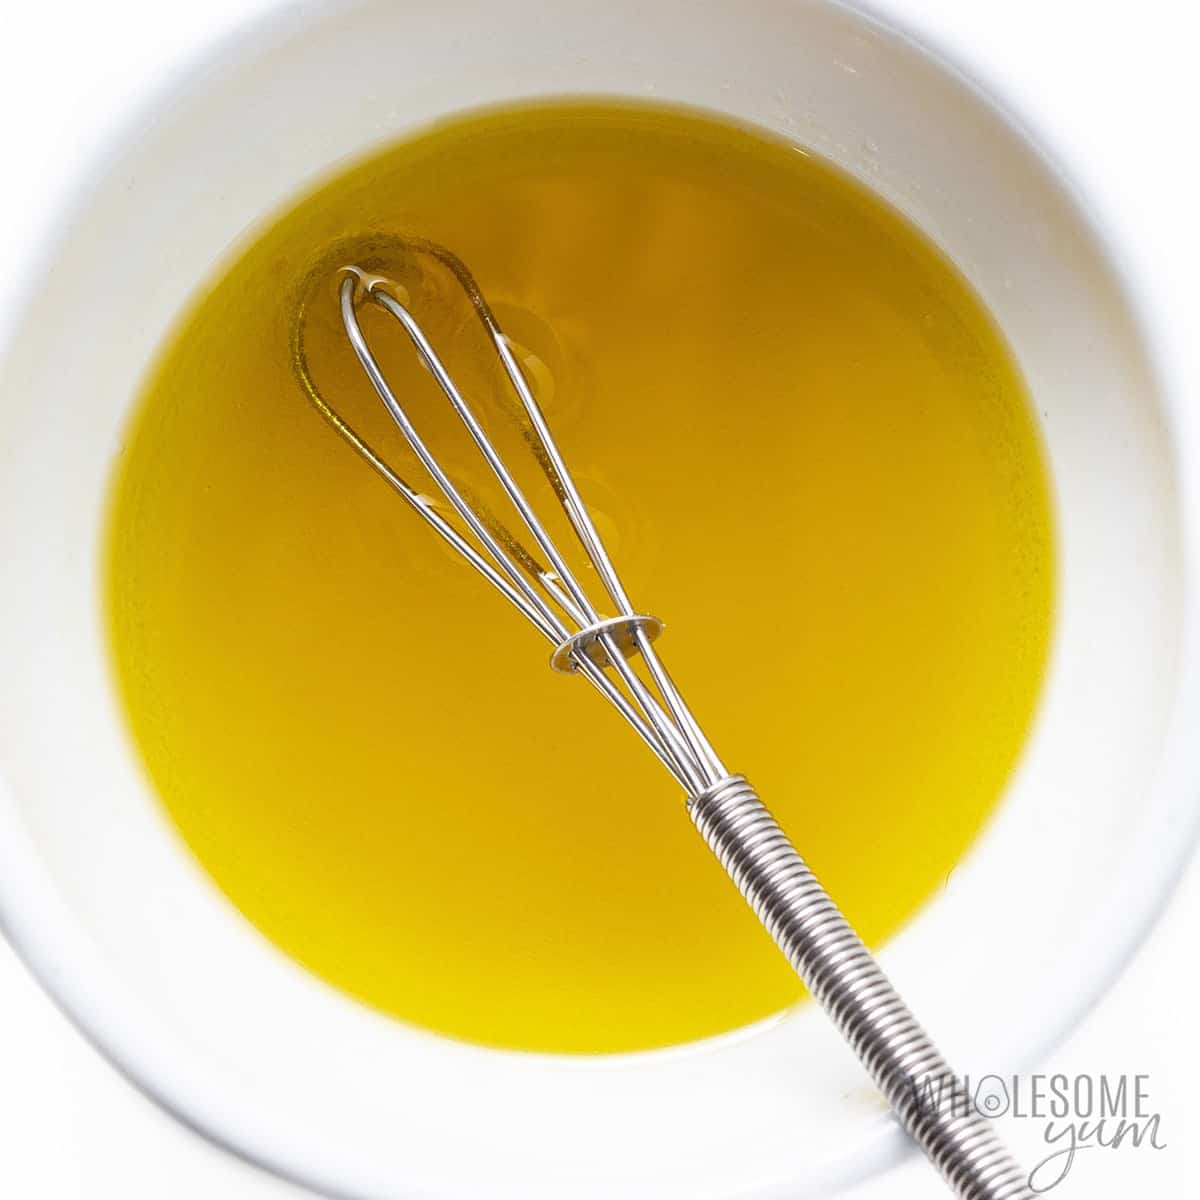 Olive oil and lemon juice in a small bowl